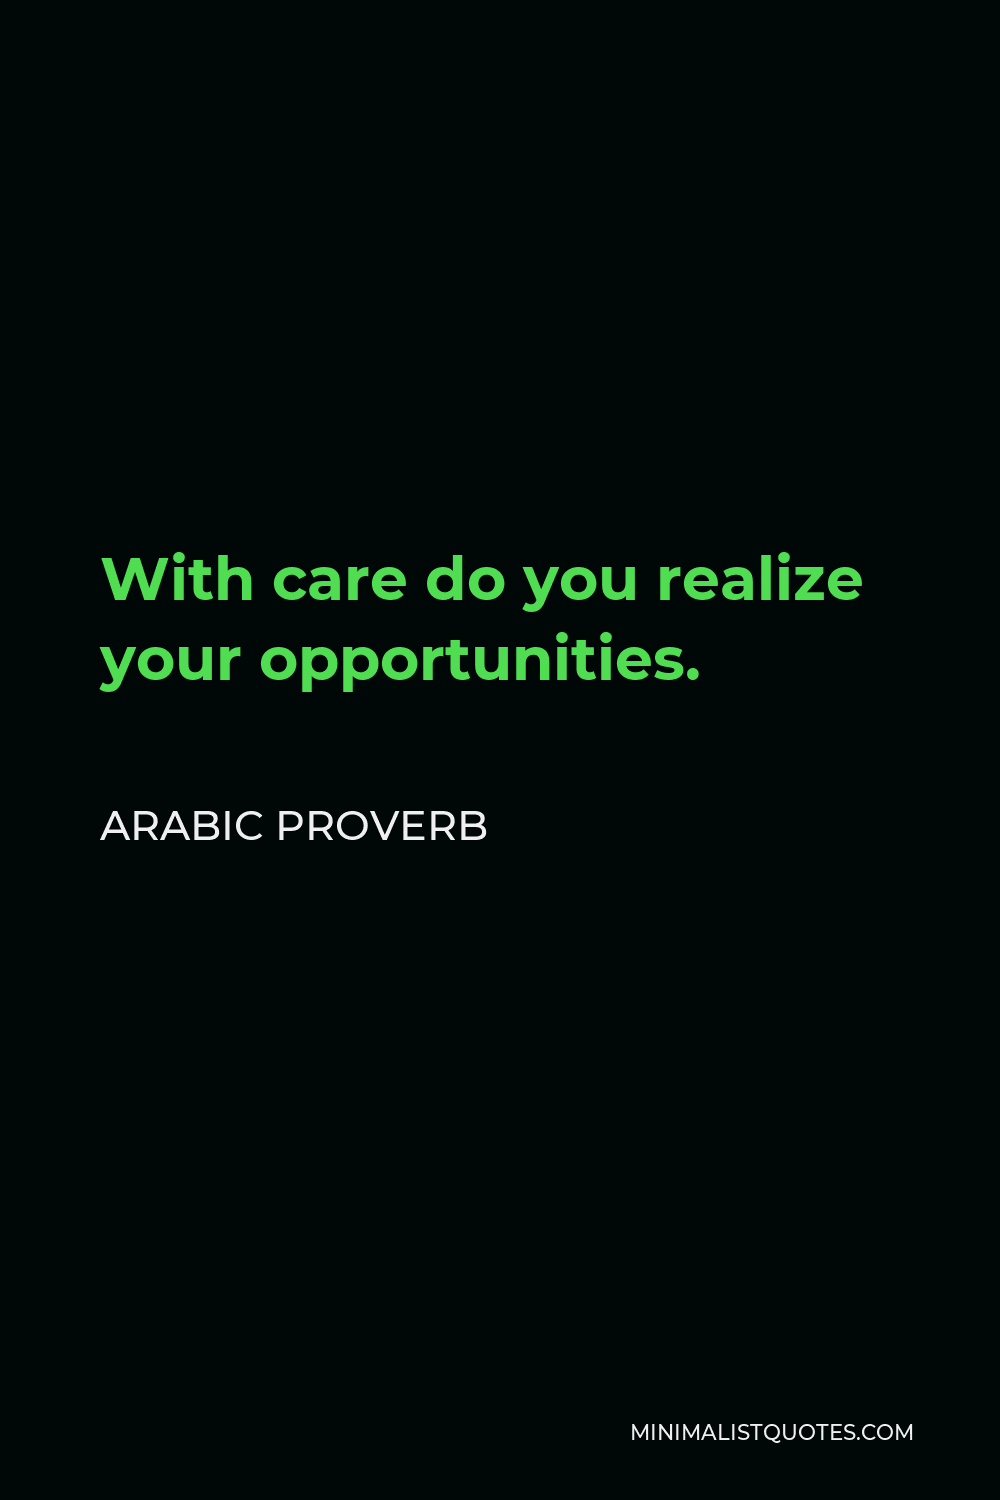 Arabic Proverb Quote - With care do you realize your opportunities.